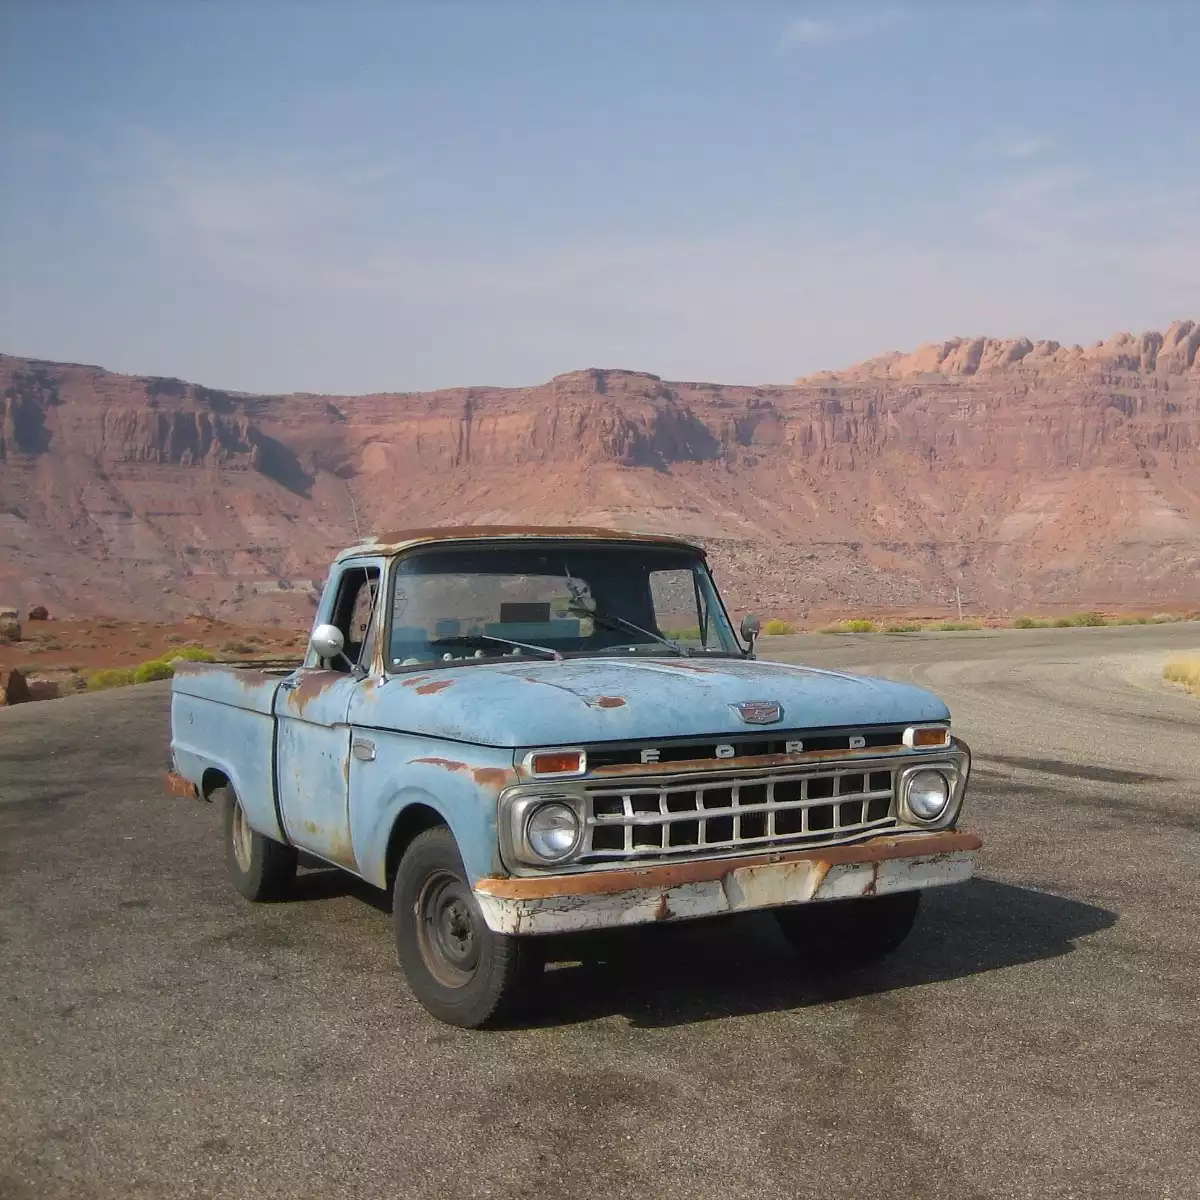 Oblique view of a parked vintage blue truck with desert mountains in the background.